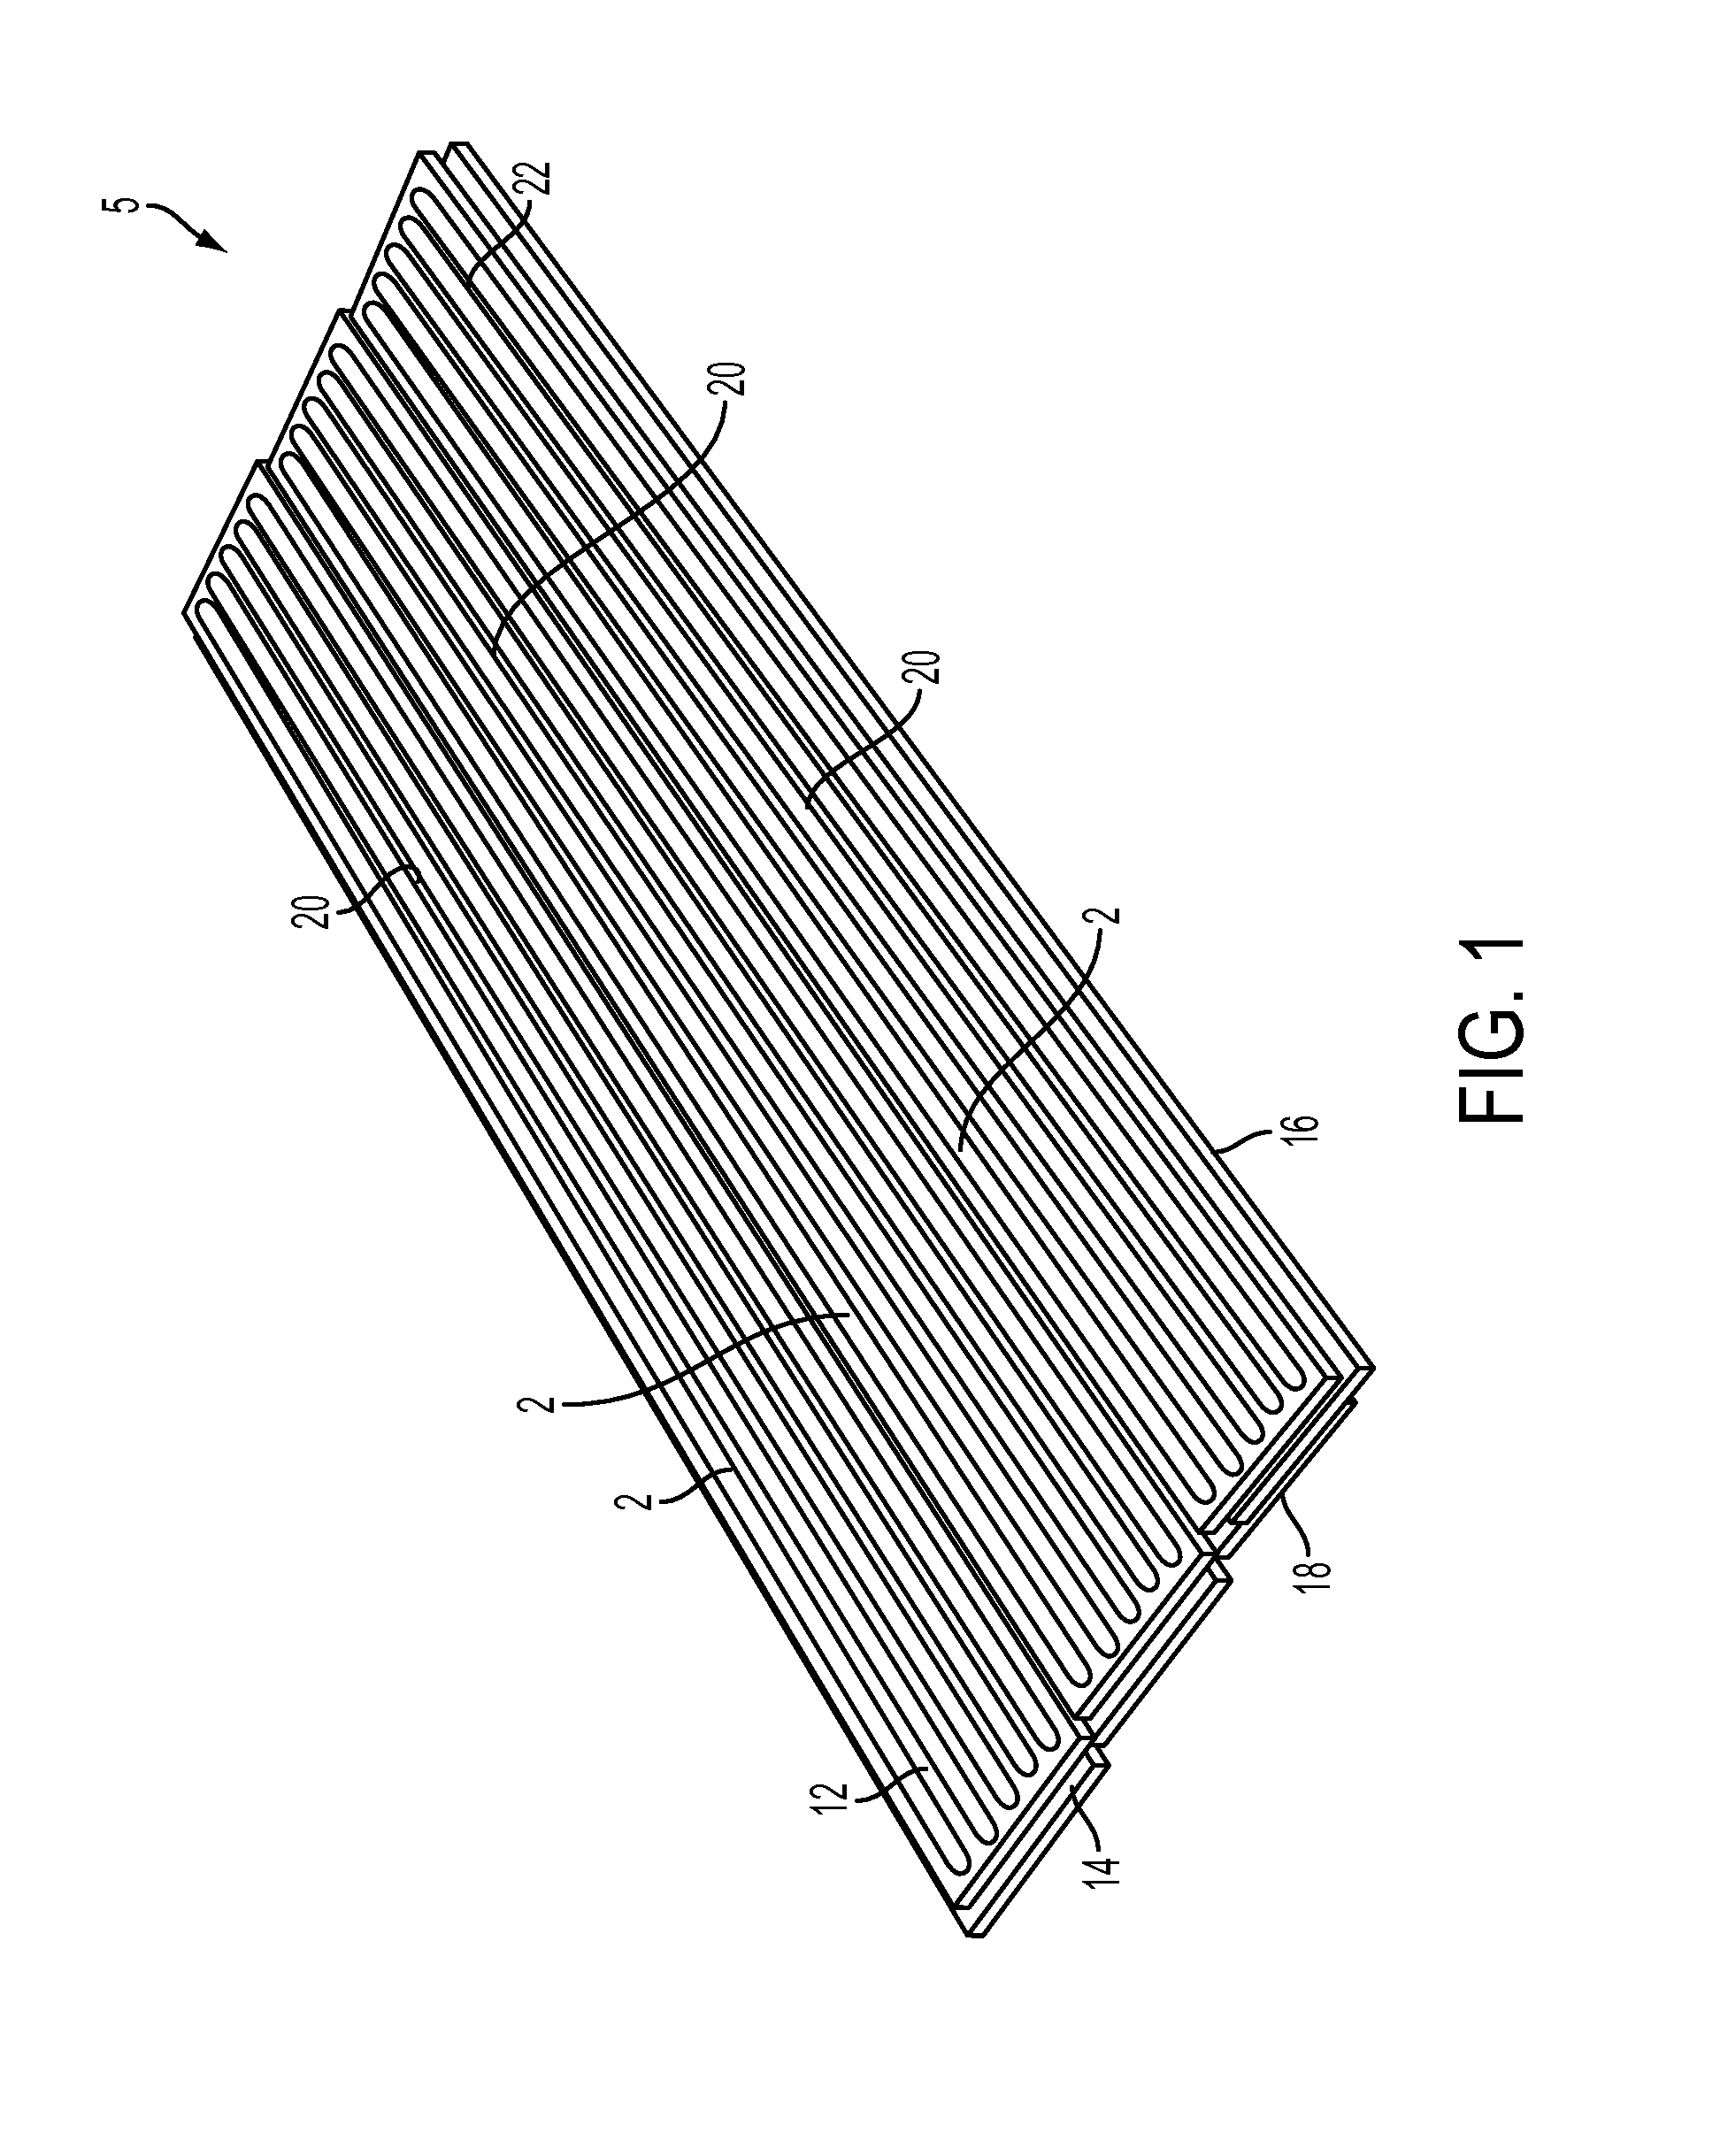 Automated hardwood texturing system and associated methods